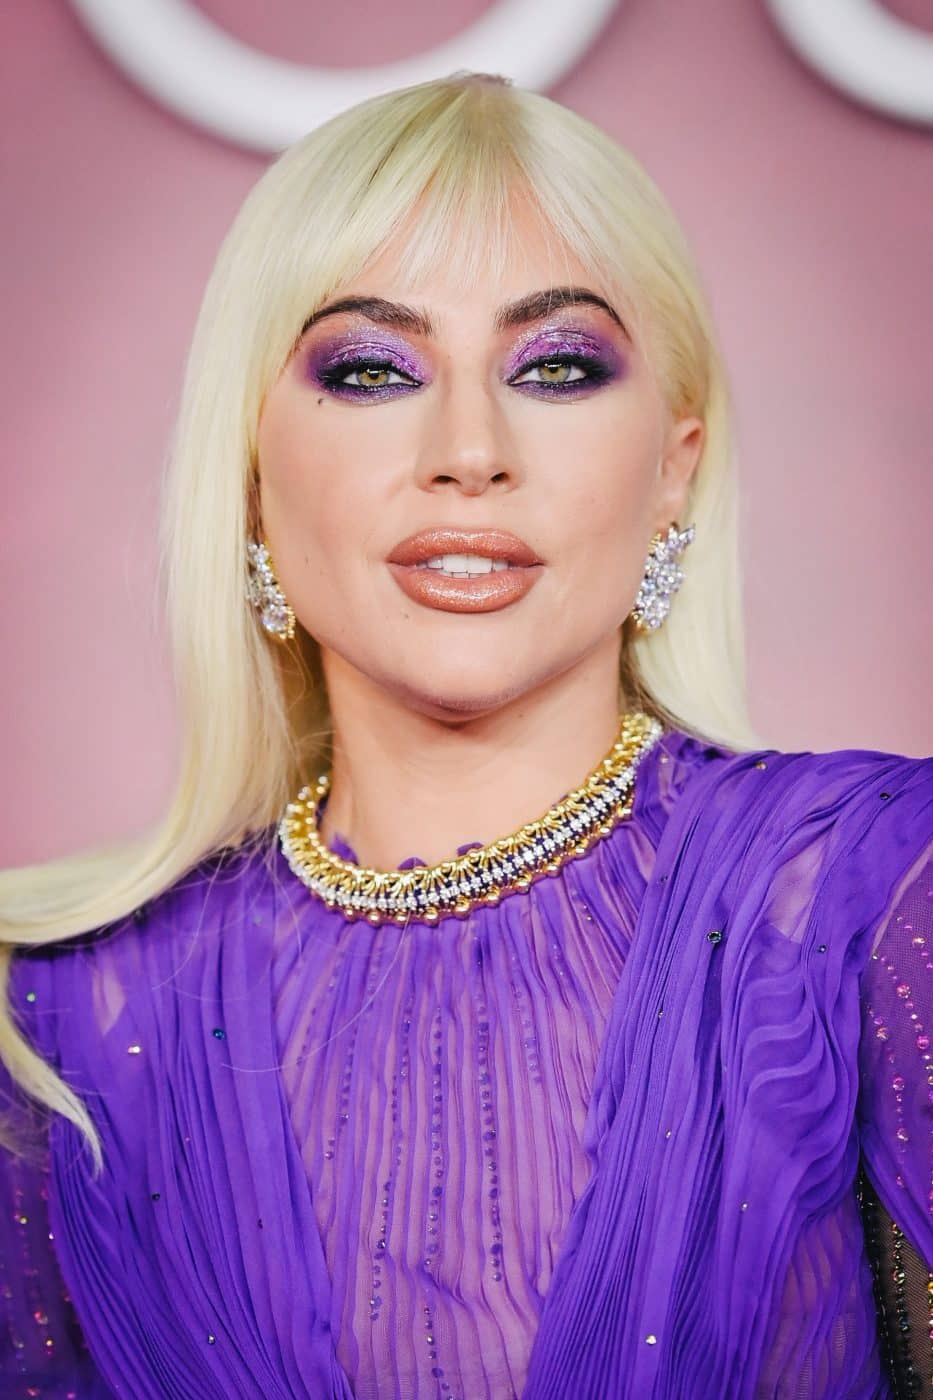 A photo of Lady Gaga wearing Jean Schlumberger for Tiffany & Co. at the UK premier of House of Gucci